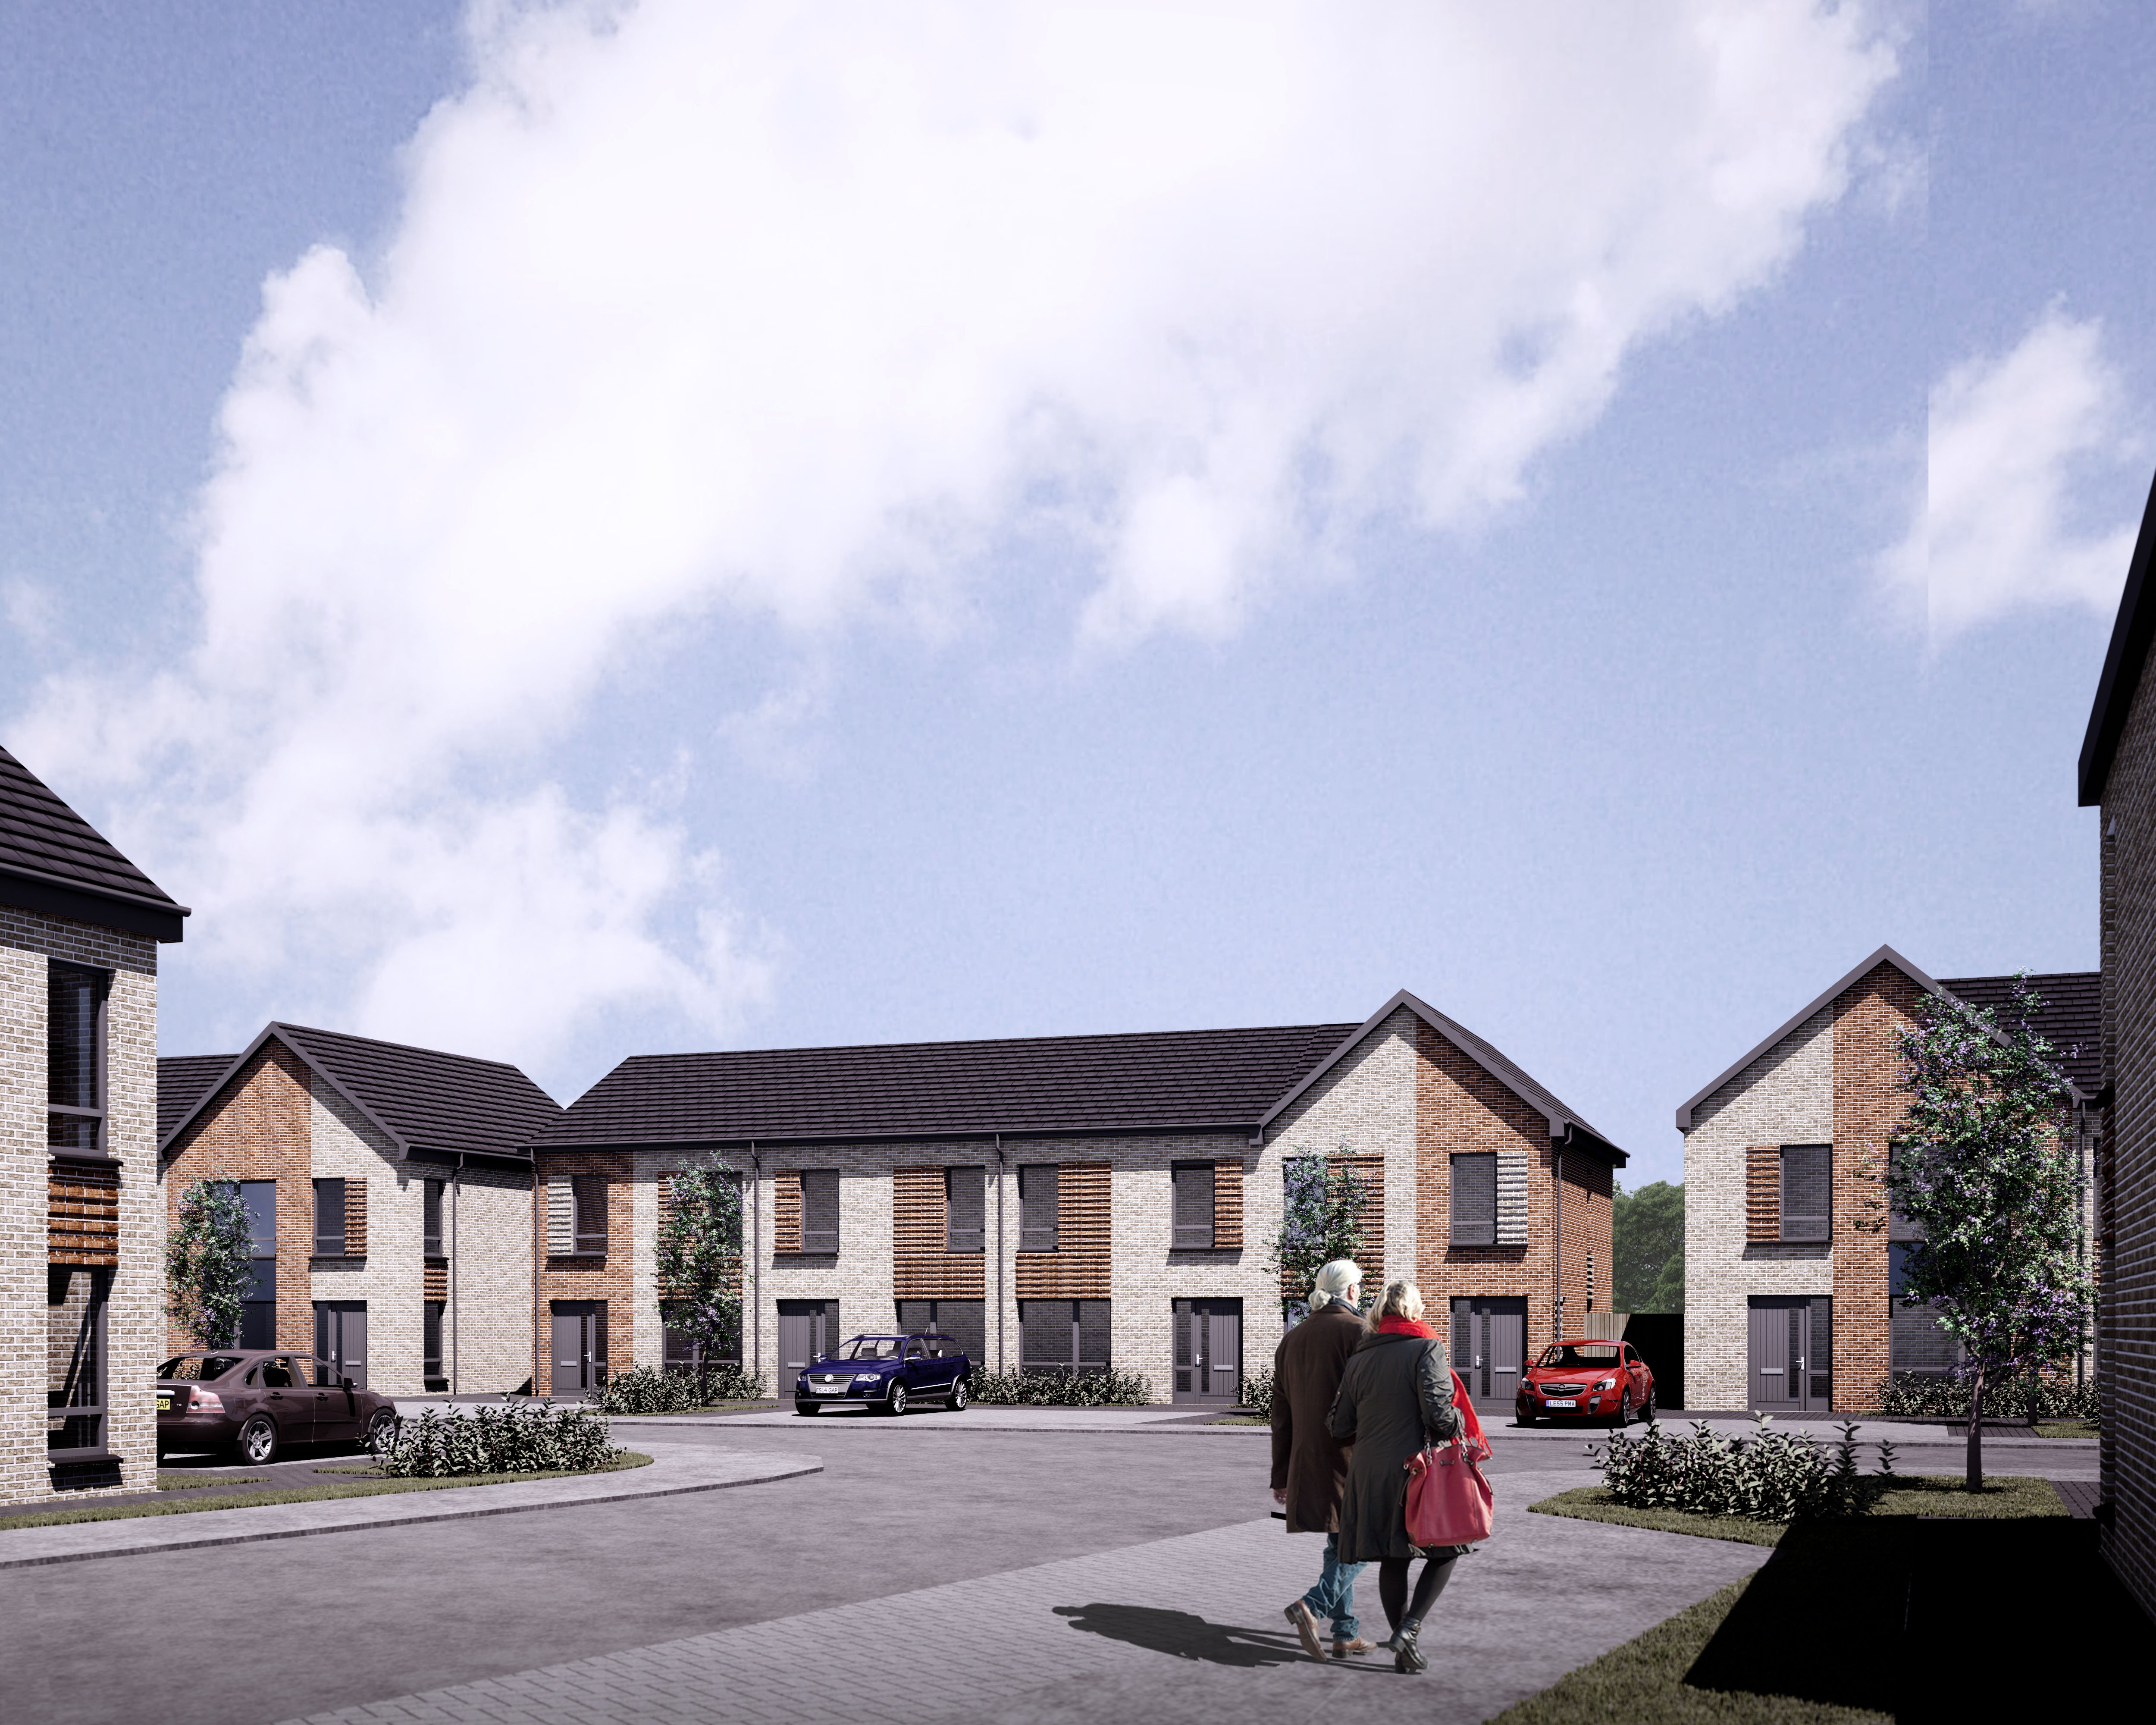 Housing association submits plans for 131 affordable homes in Paisley